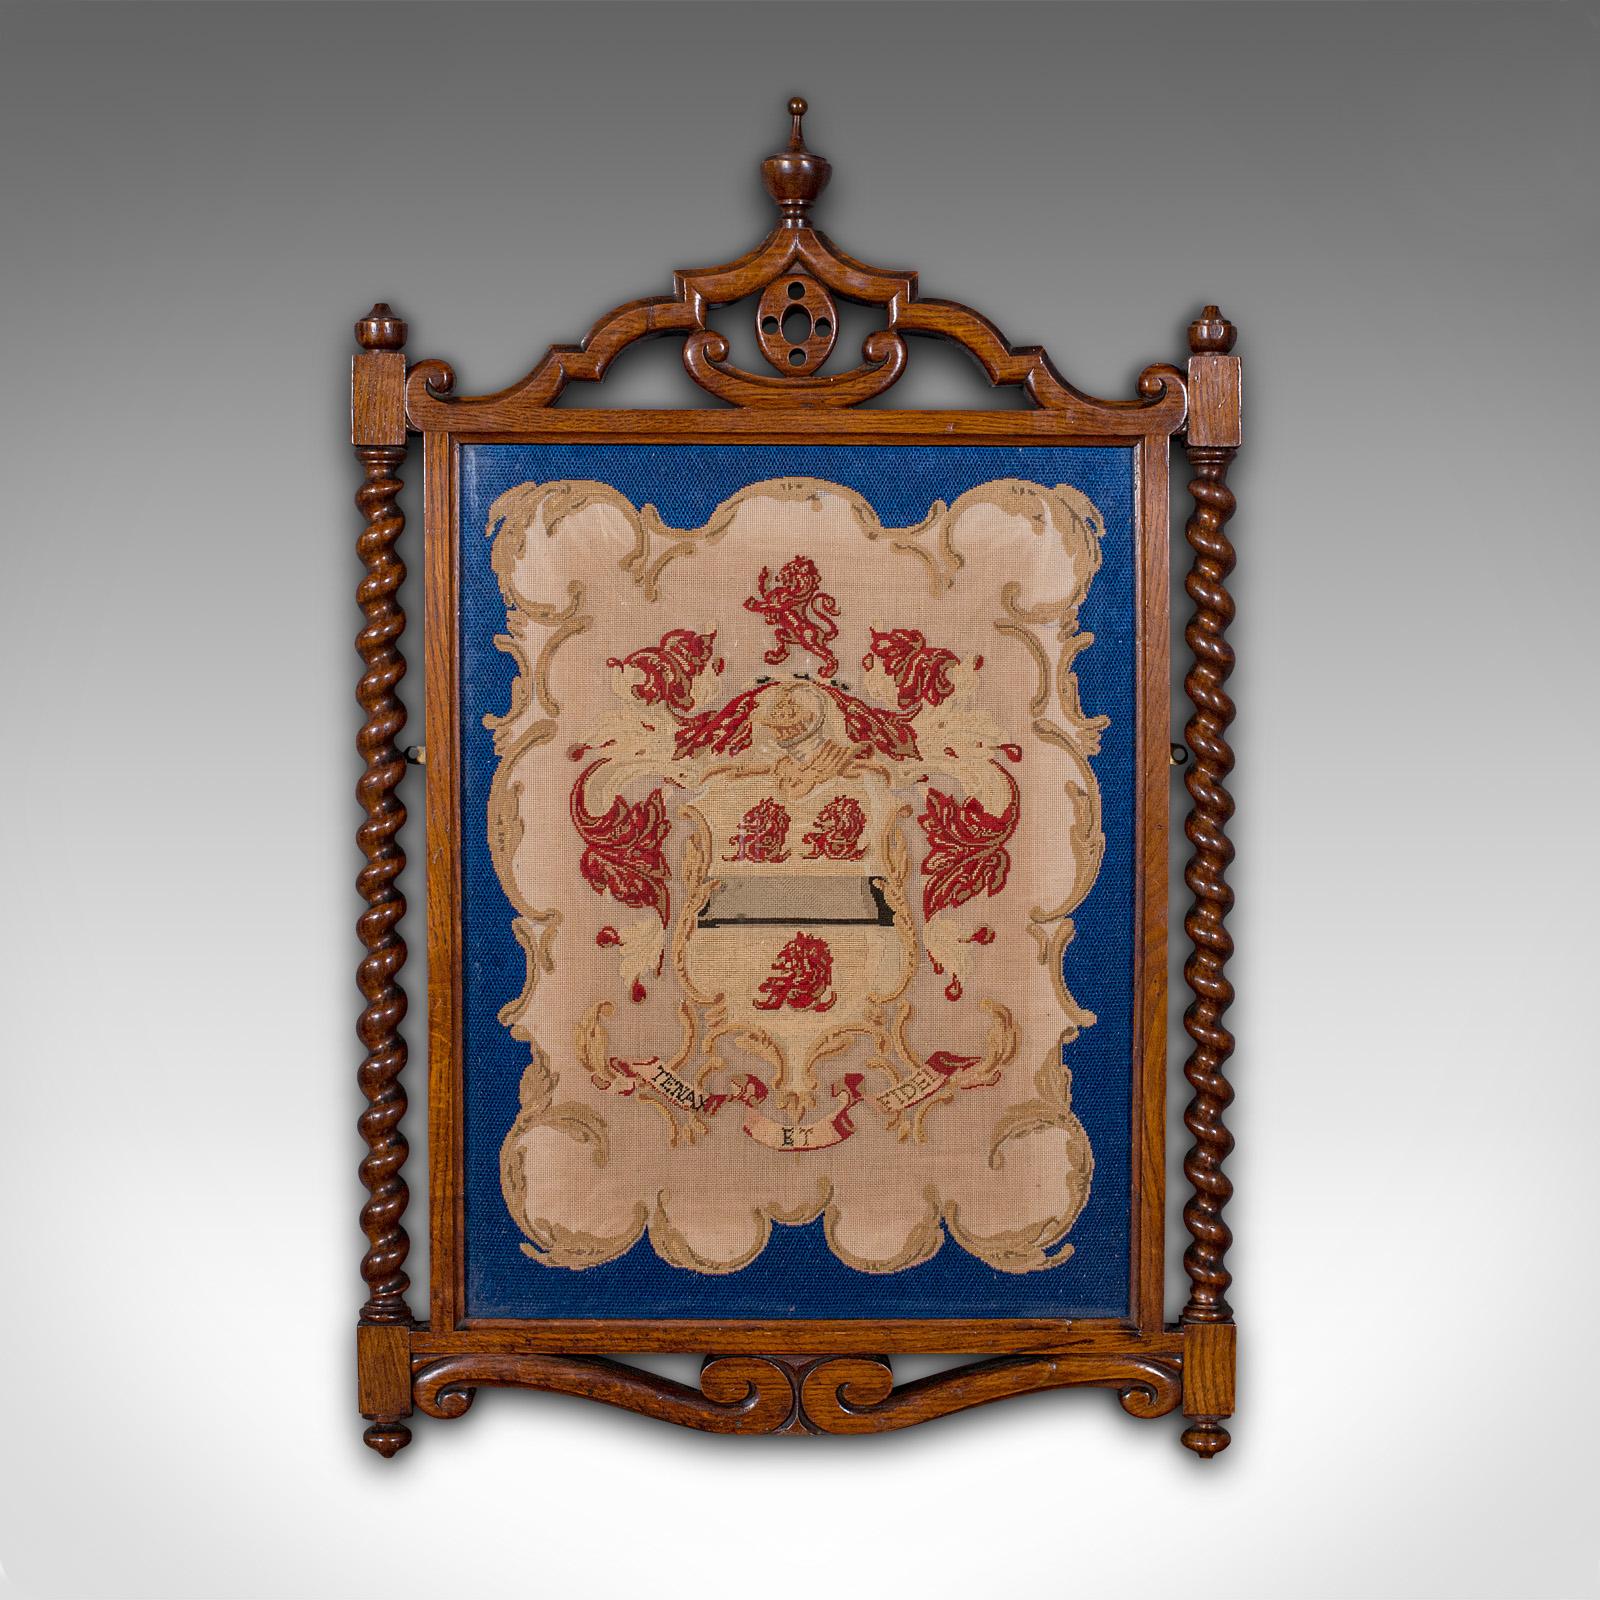 This is an antique framed coat of arms. An English, needlepoint heraldic tapestry in oak frame, dating to the Victorian period, circa 1900.

Presented beautifully within a quality frame
Displays a desirable aged patina and in good